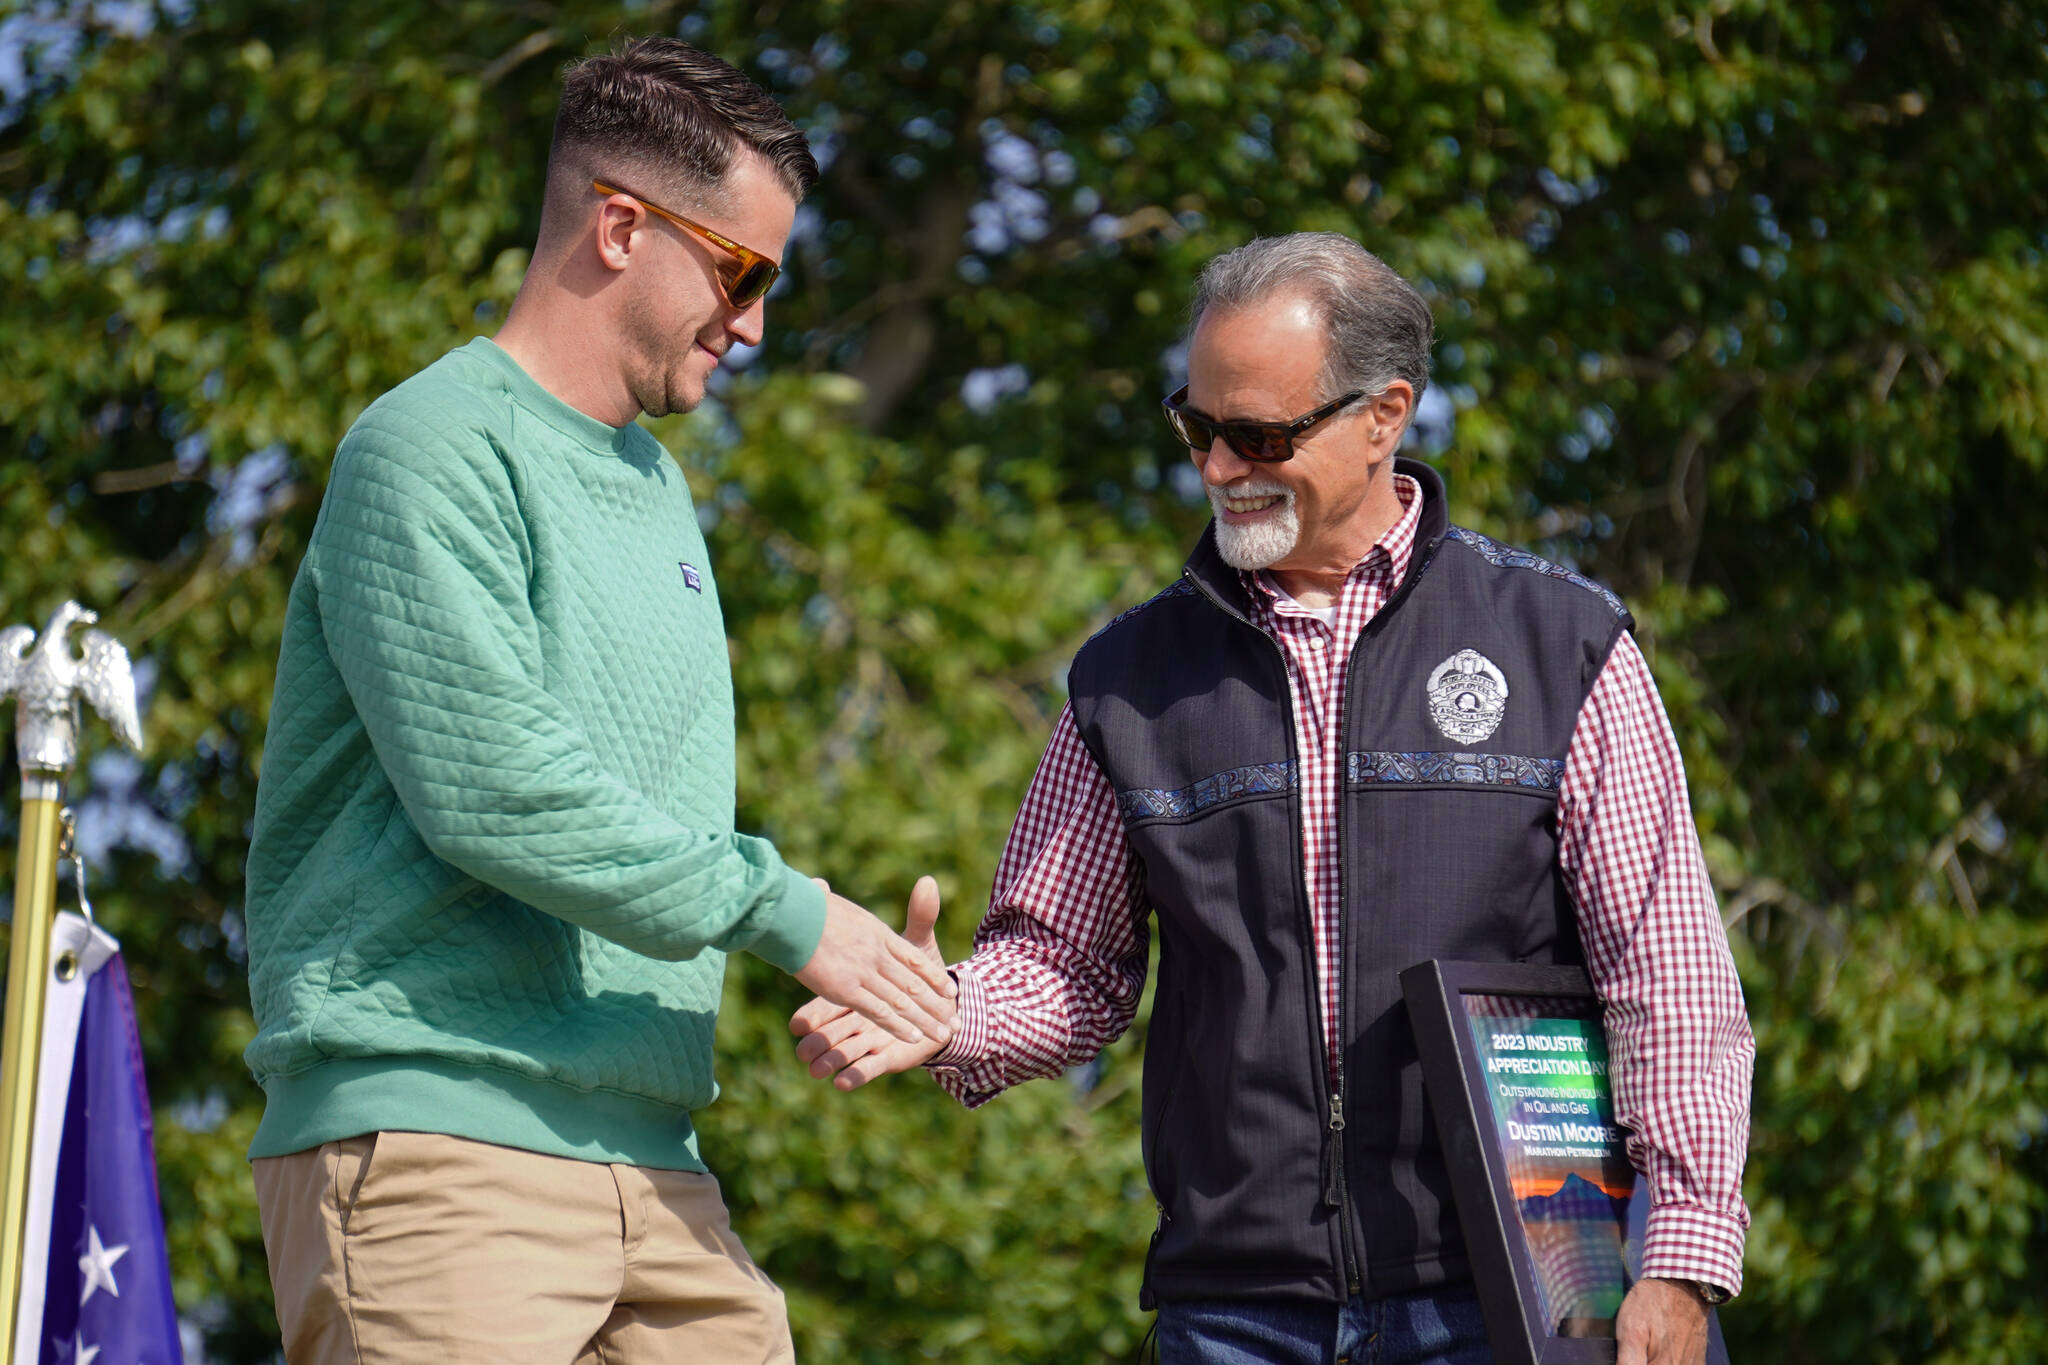 Dustin Moore receives the Outstanding Individual in Oil and Gas Award from Kenai Peninsula Borough Mayor Peter Micciche during Industry Appreciation Day festivities at the Kenai softball greenstrip on Saturday, Aug. 19, 2023. (Jake Dye/Peninsula Clarion)